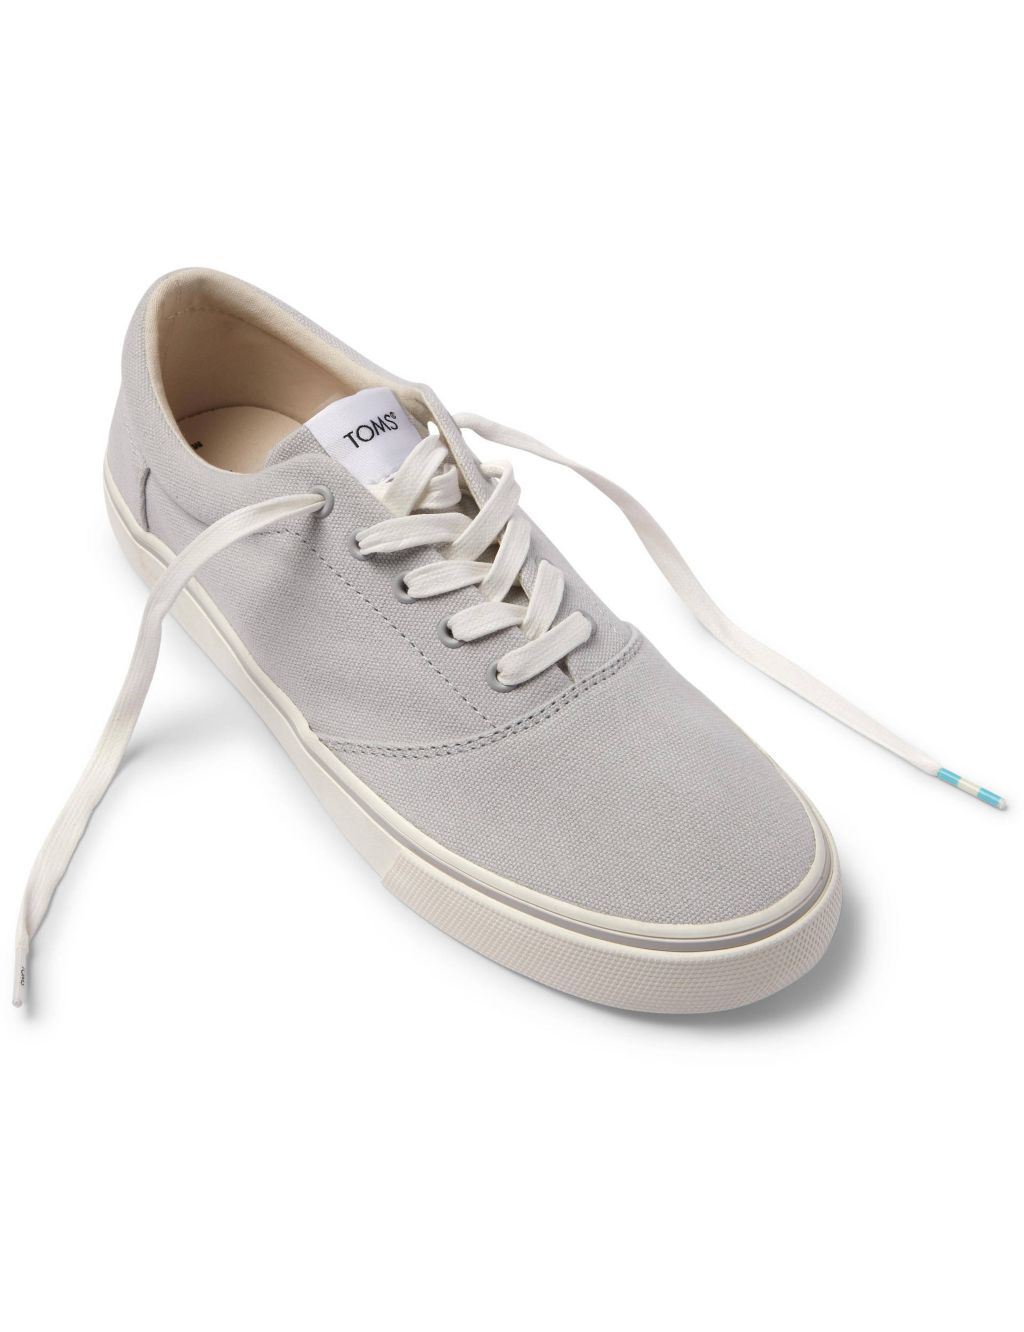 Canvas Lace Up Trainers image 2